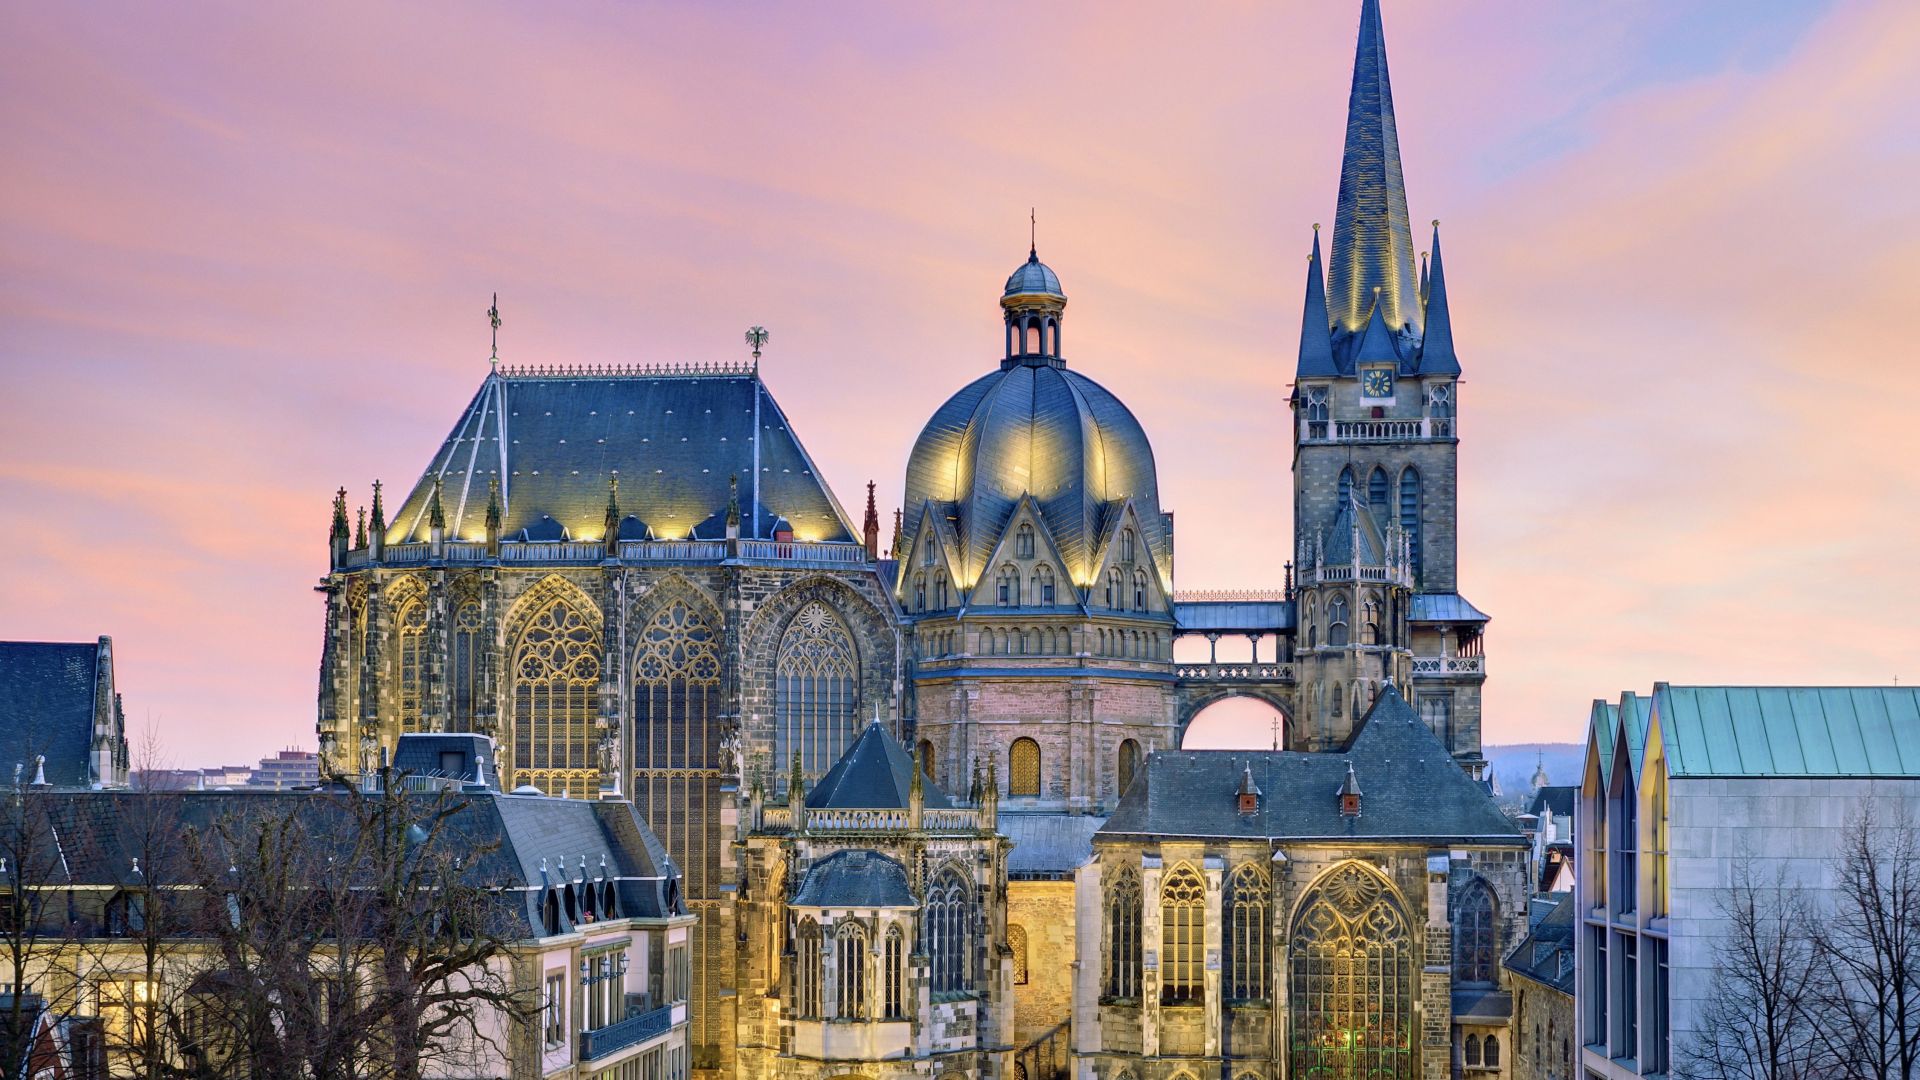 Aachen: Cathedral in the evening light